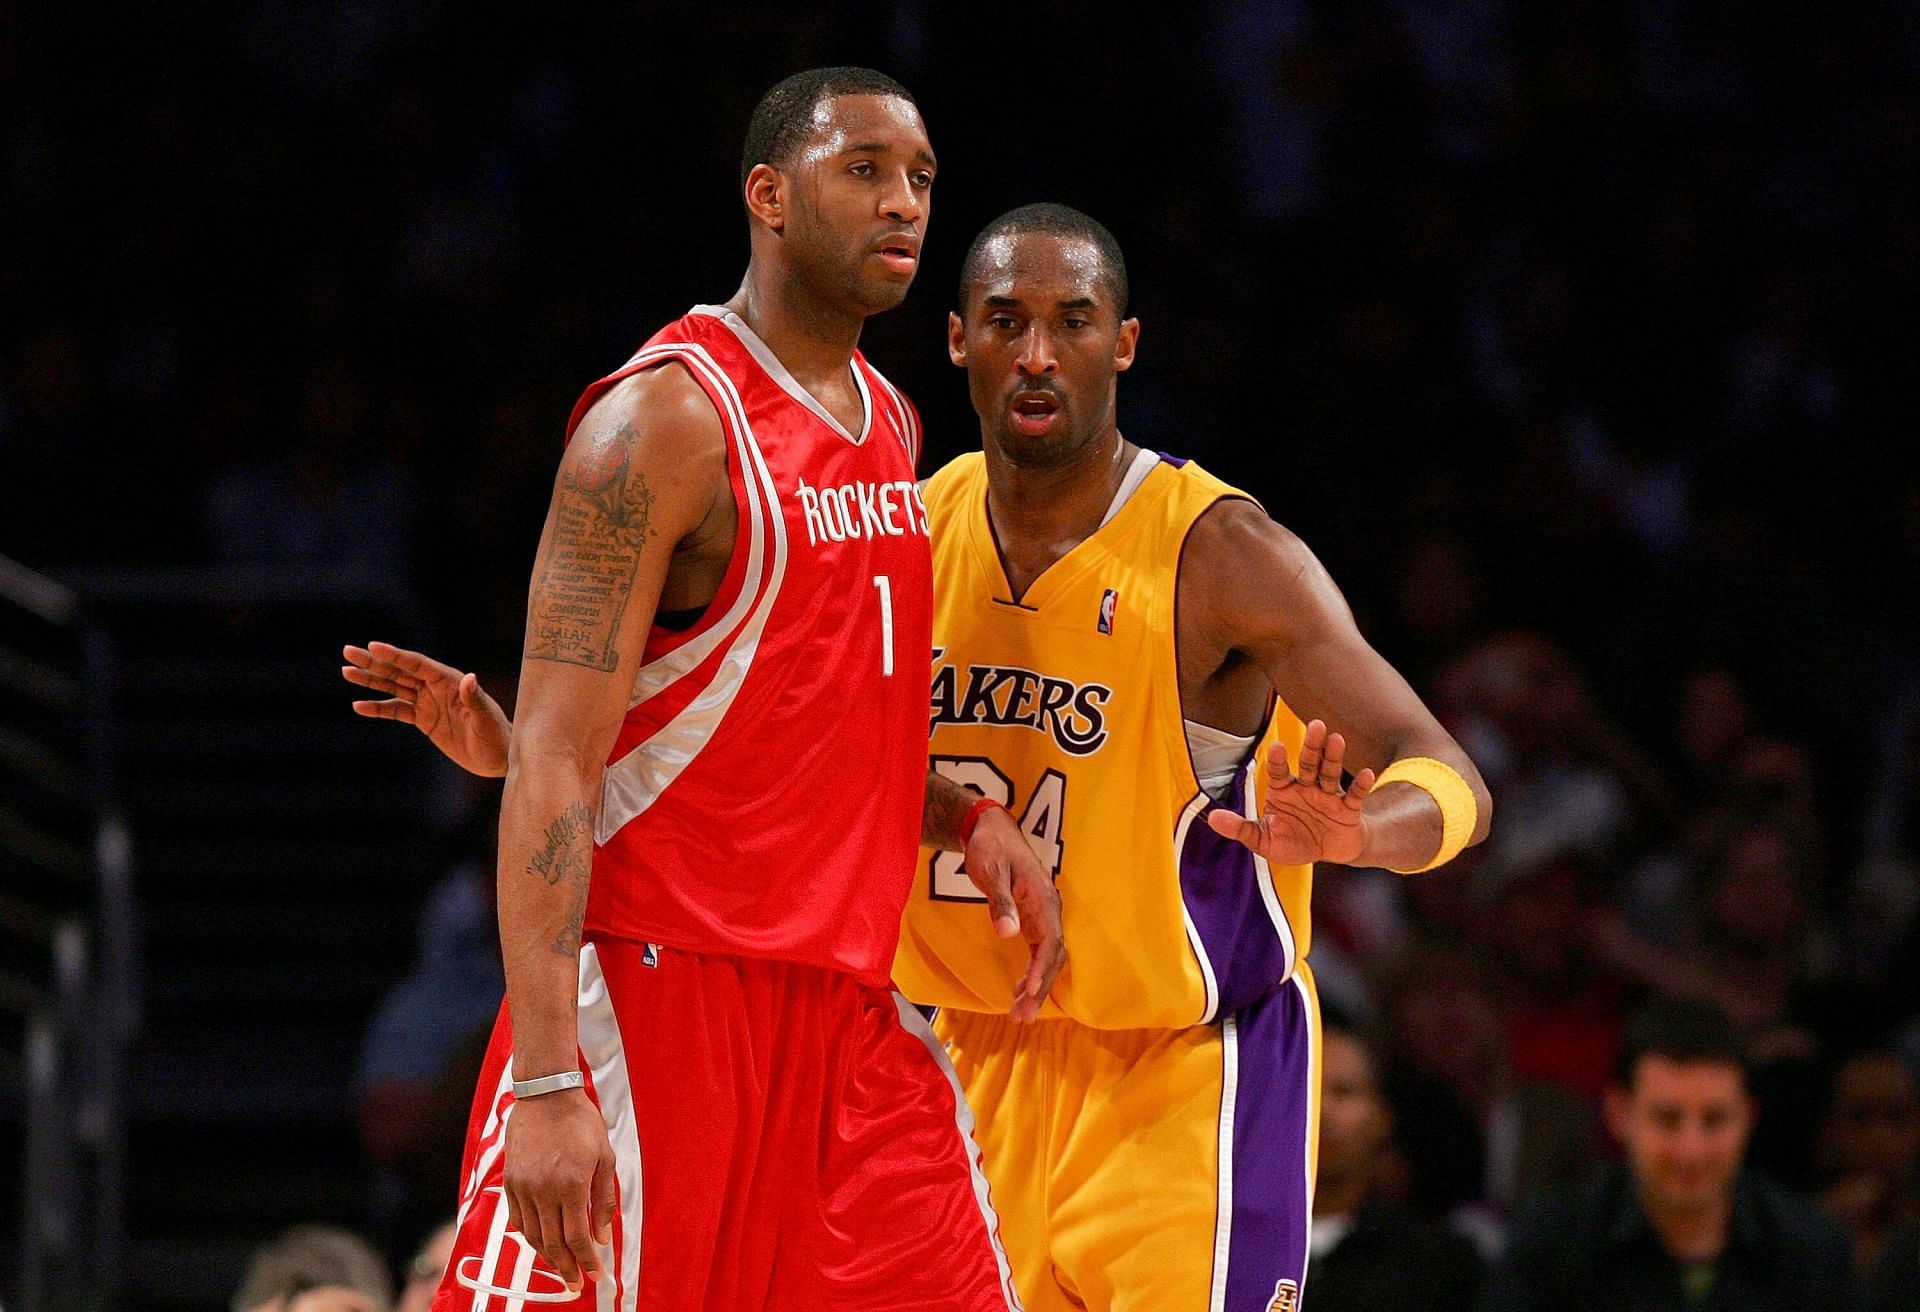 Tracy McGrady on the left and Kobe Bryant on the right